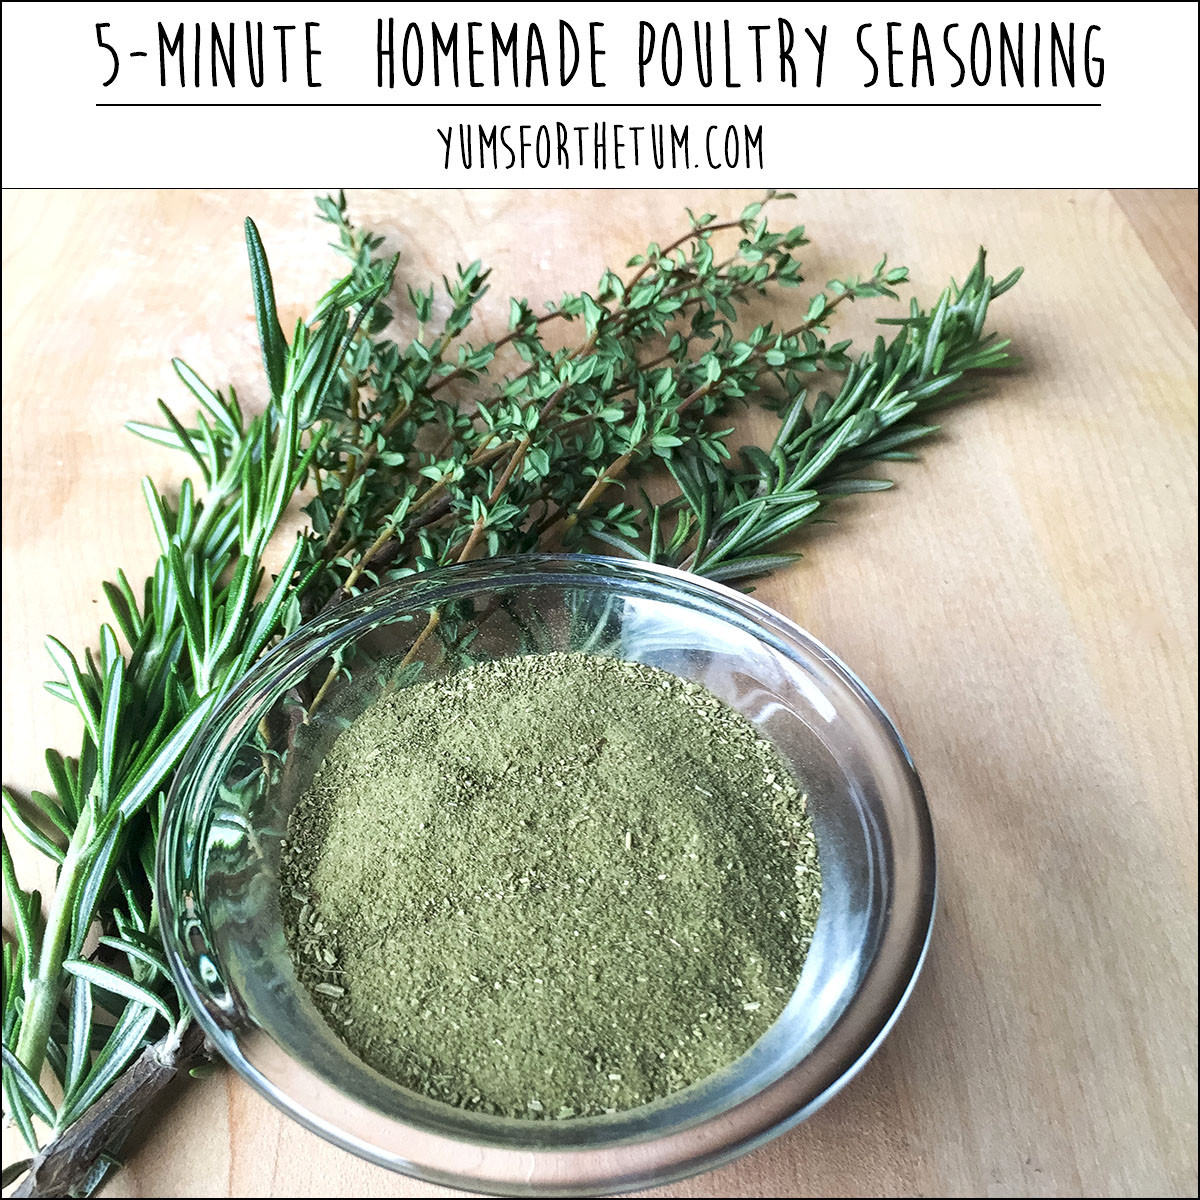 5-Minute Homemade Poultry Seasoning